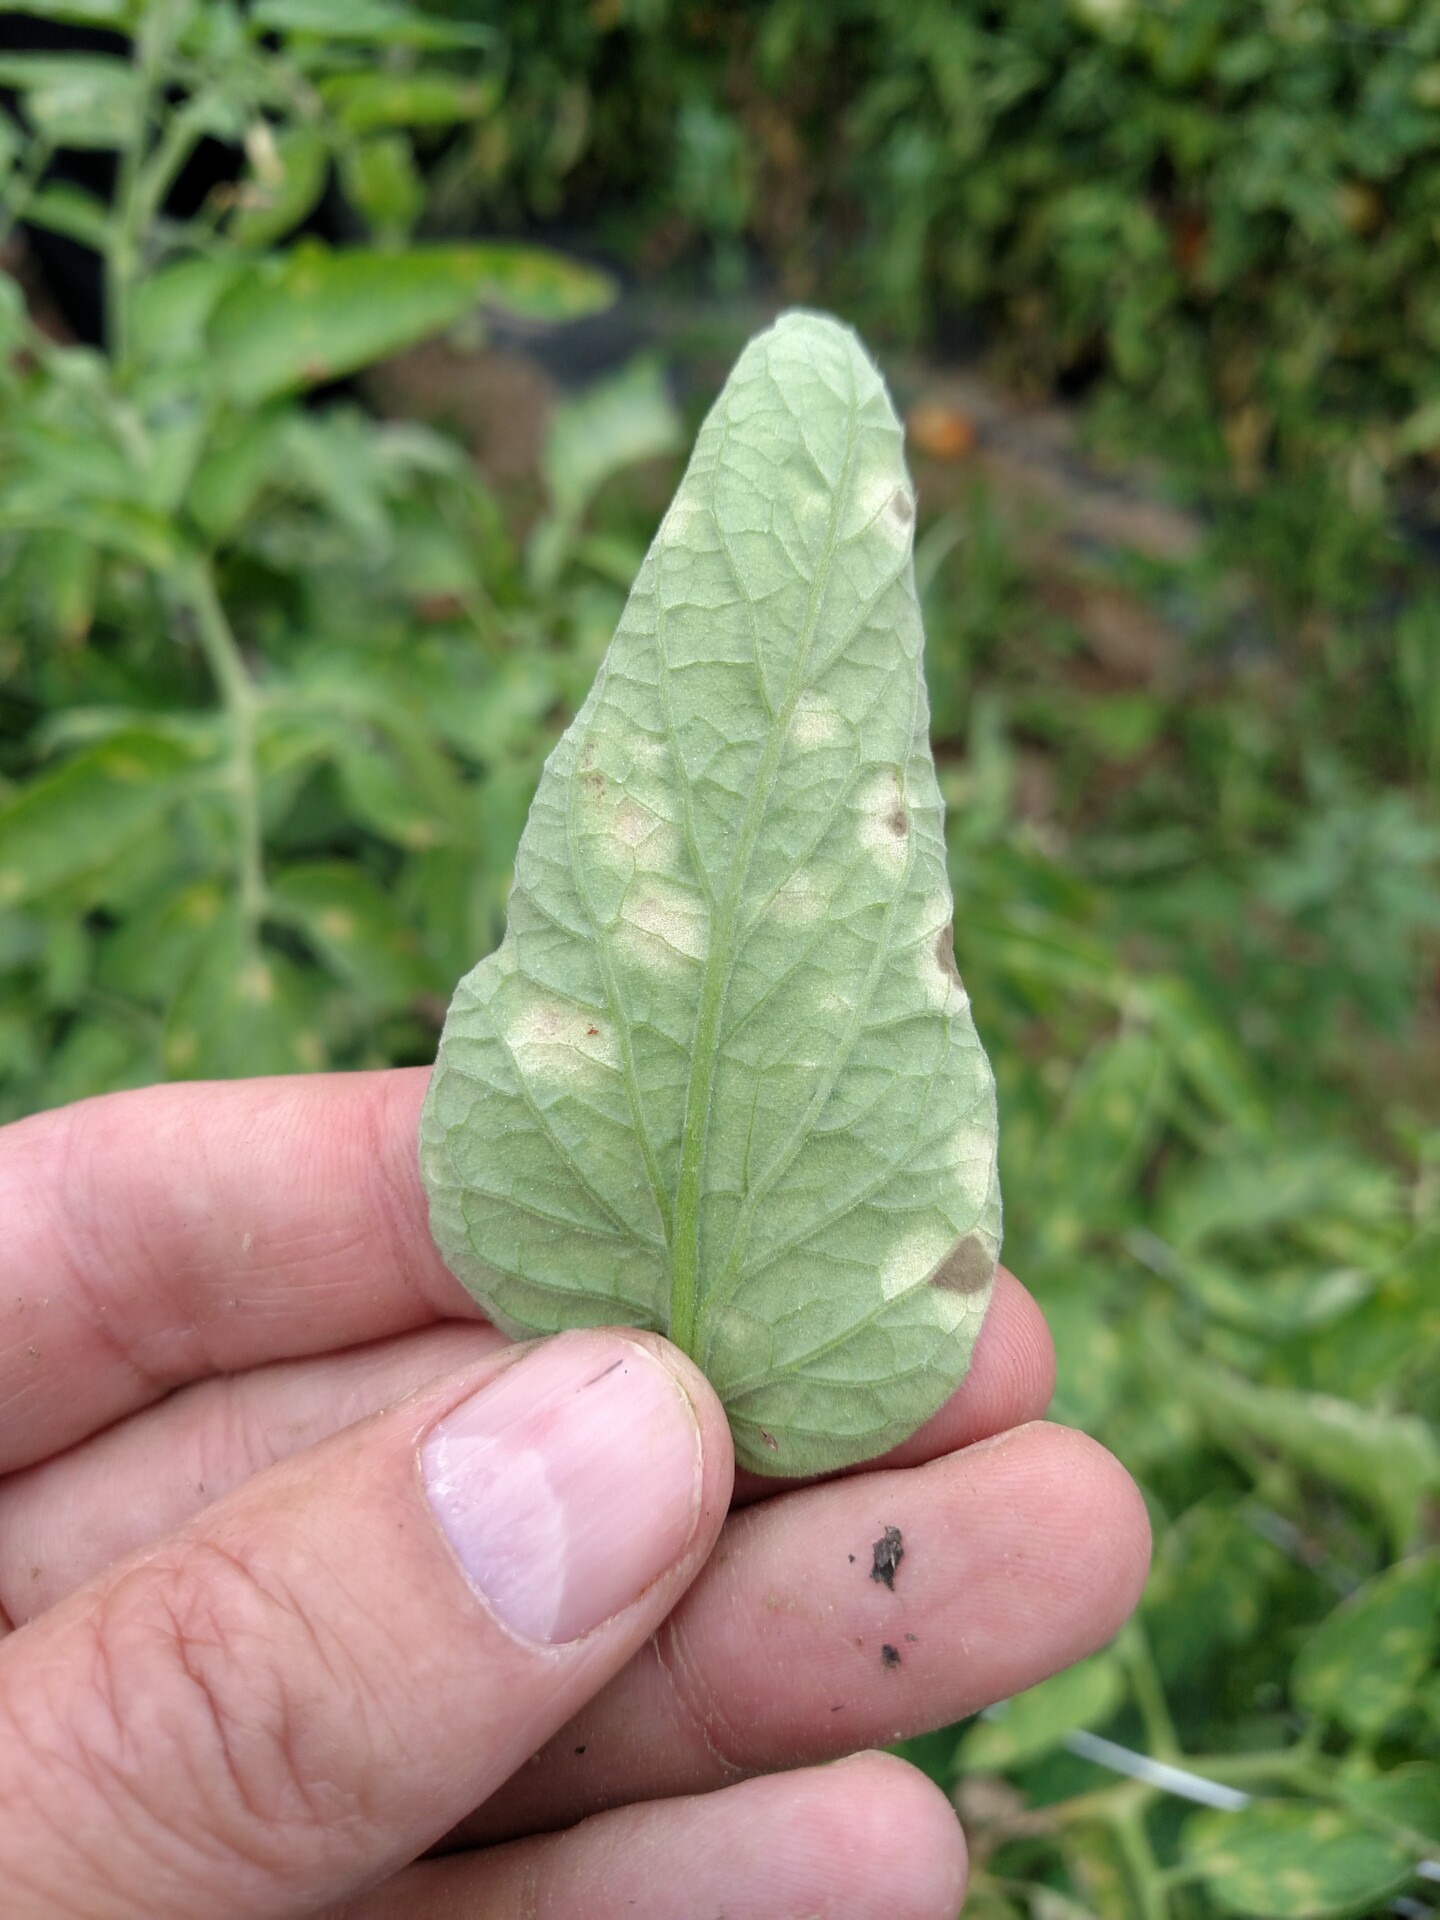  Underside of tomato leaf with leaf mold showing sporulation of causal fungus just starting.